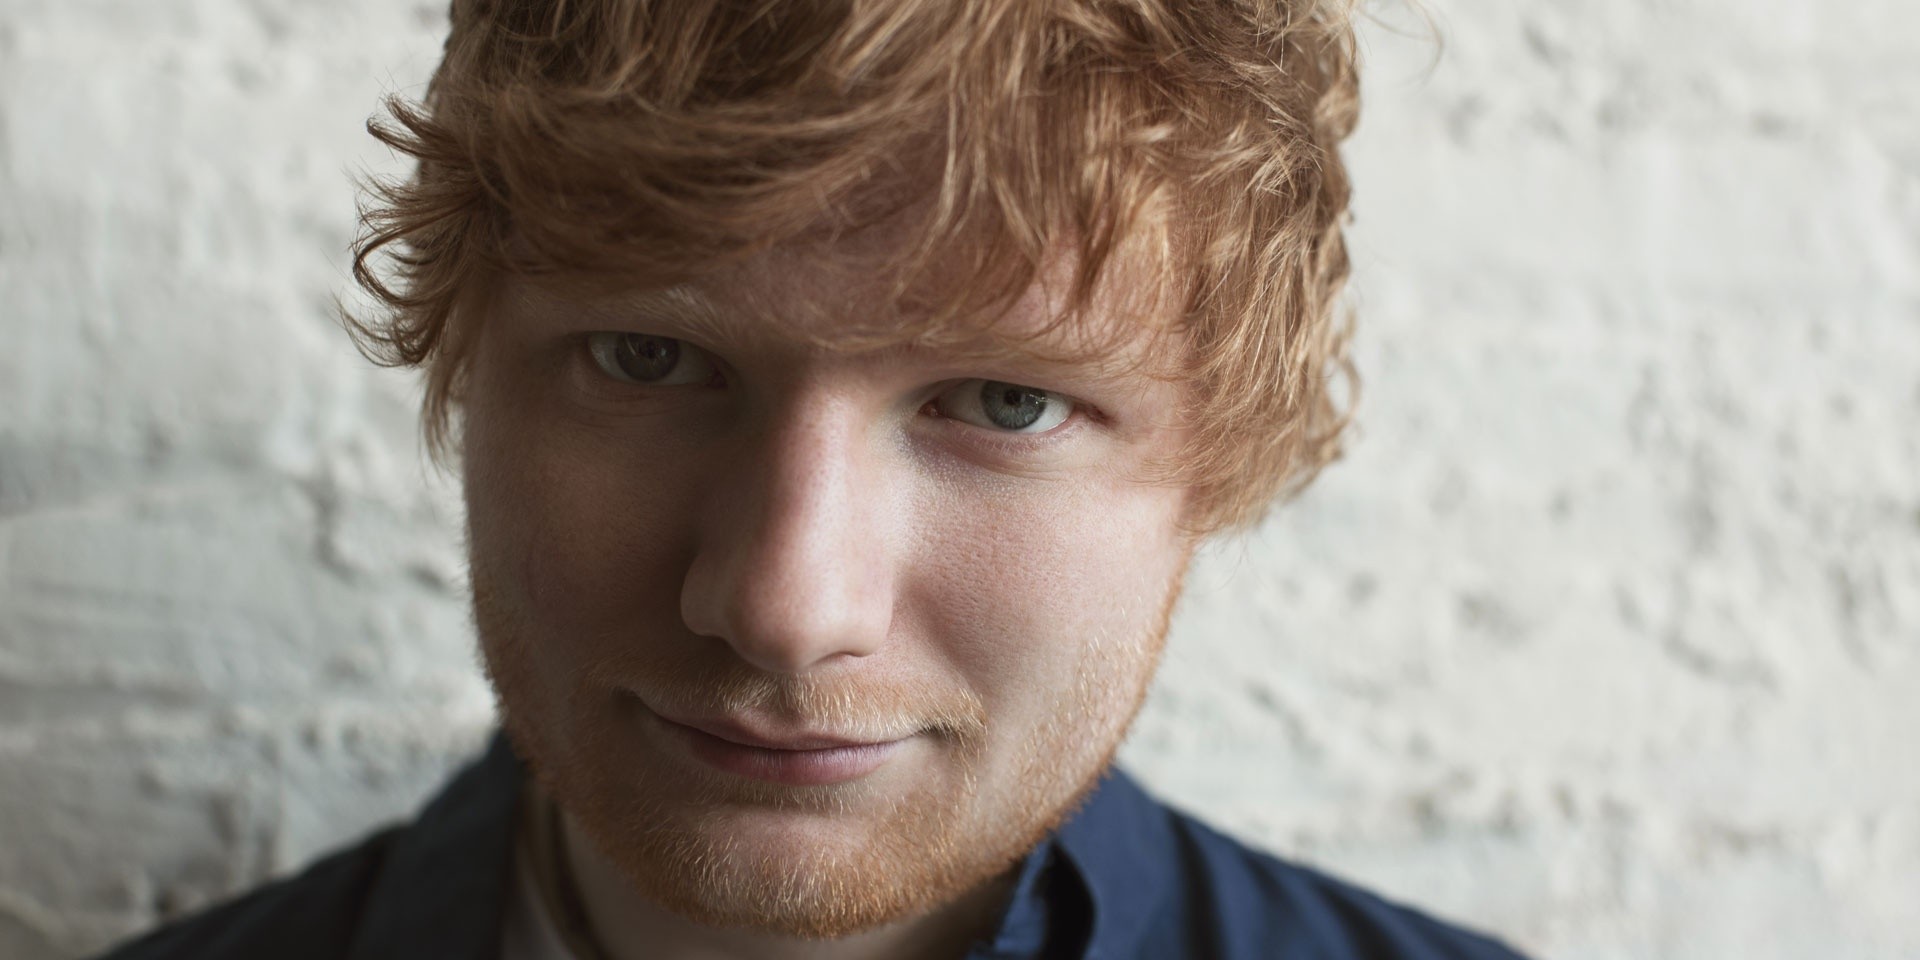 Ed Sheeran to mount  No. 6 Collaborations Project pop-up store in Manila